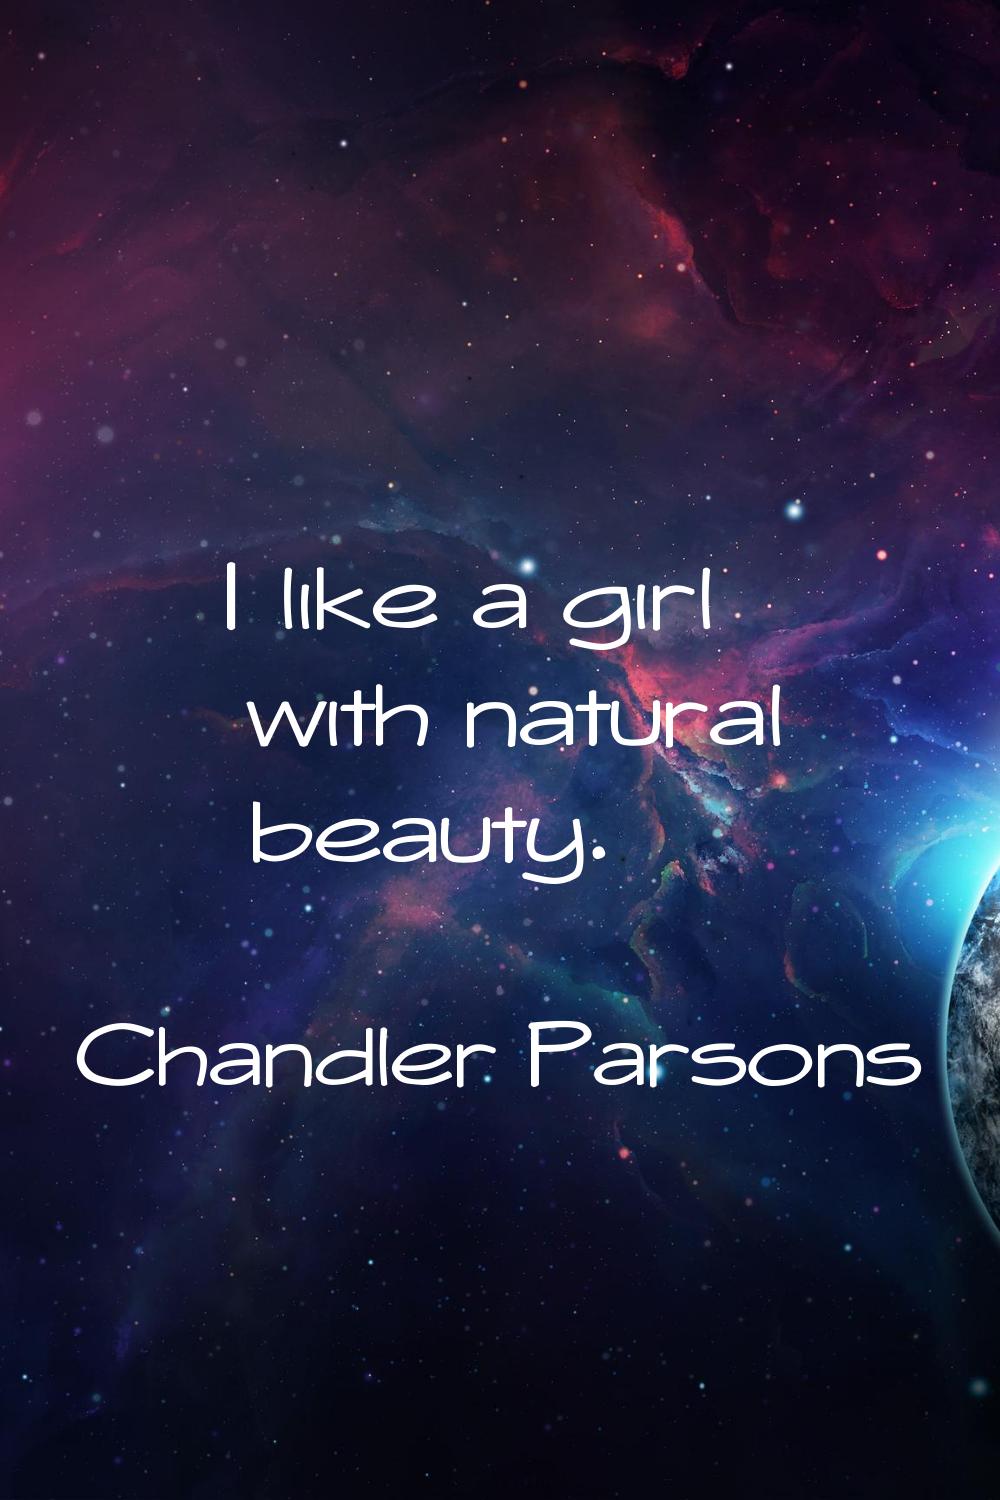 I like a girl with natural beauty.